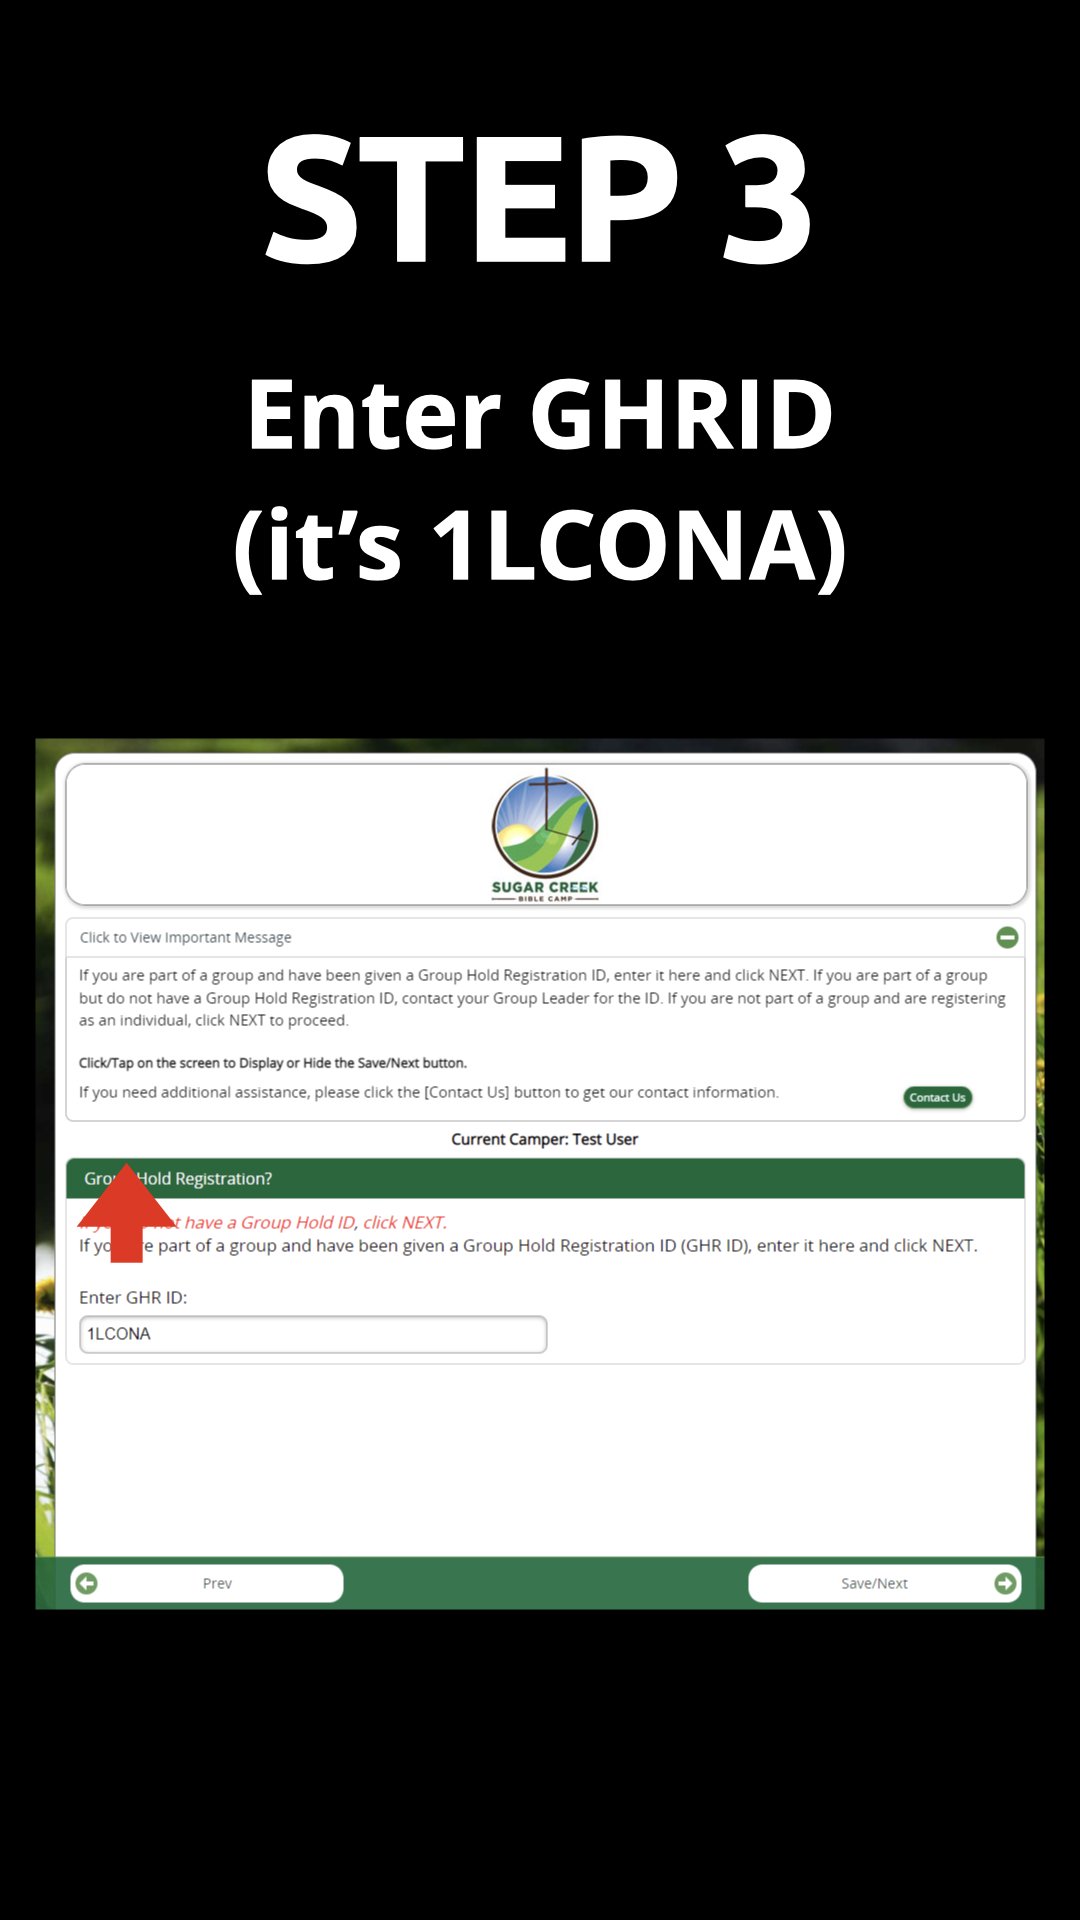   Enter your GHR ID:  1LCONA 